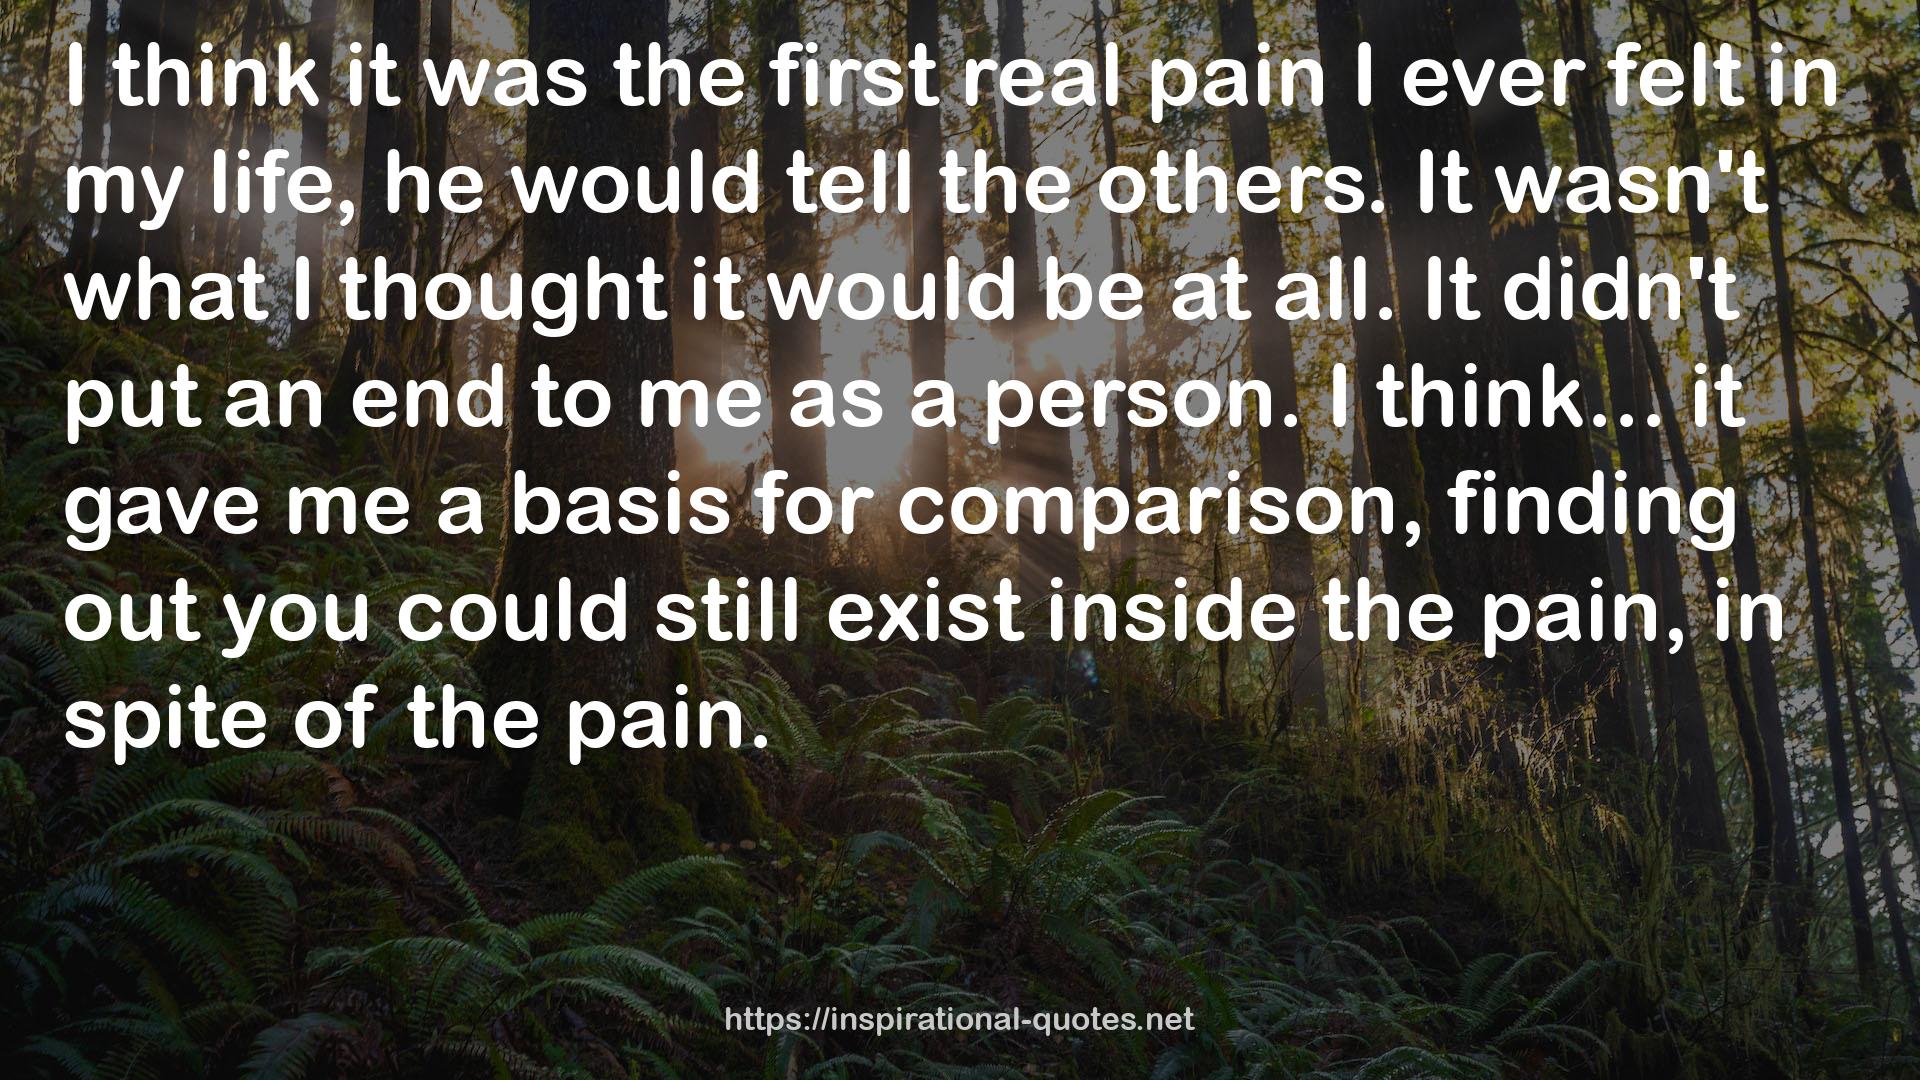 the first real pain  QUOTES